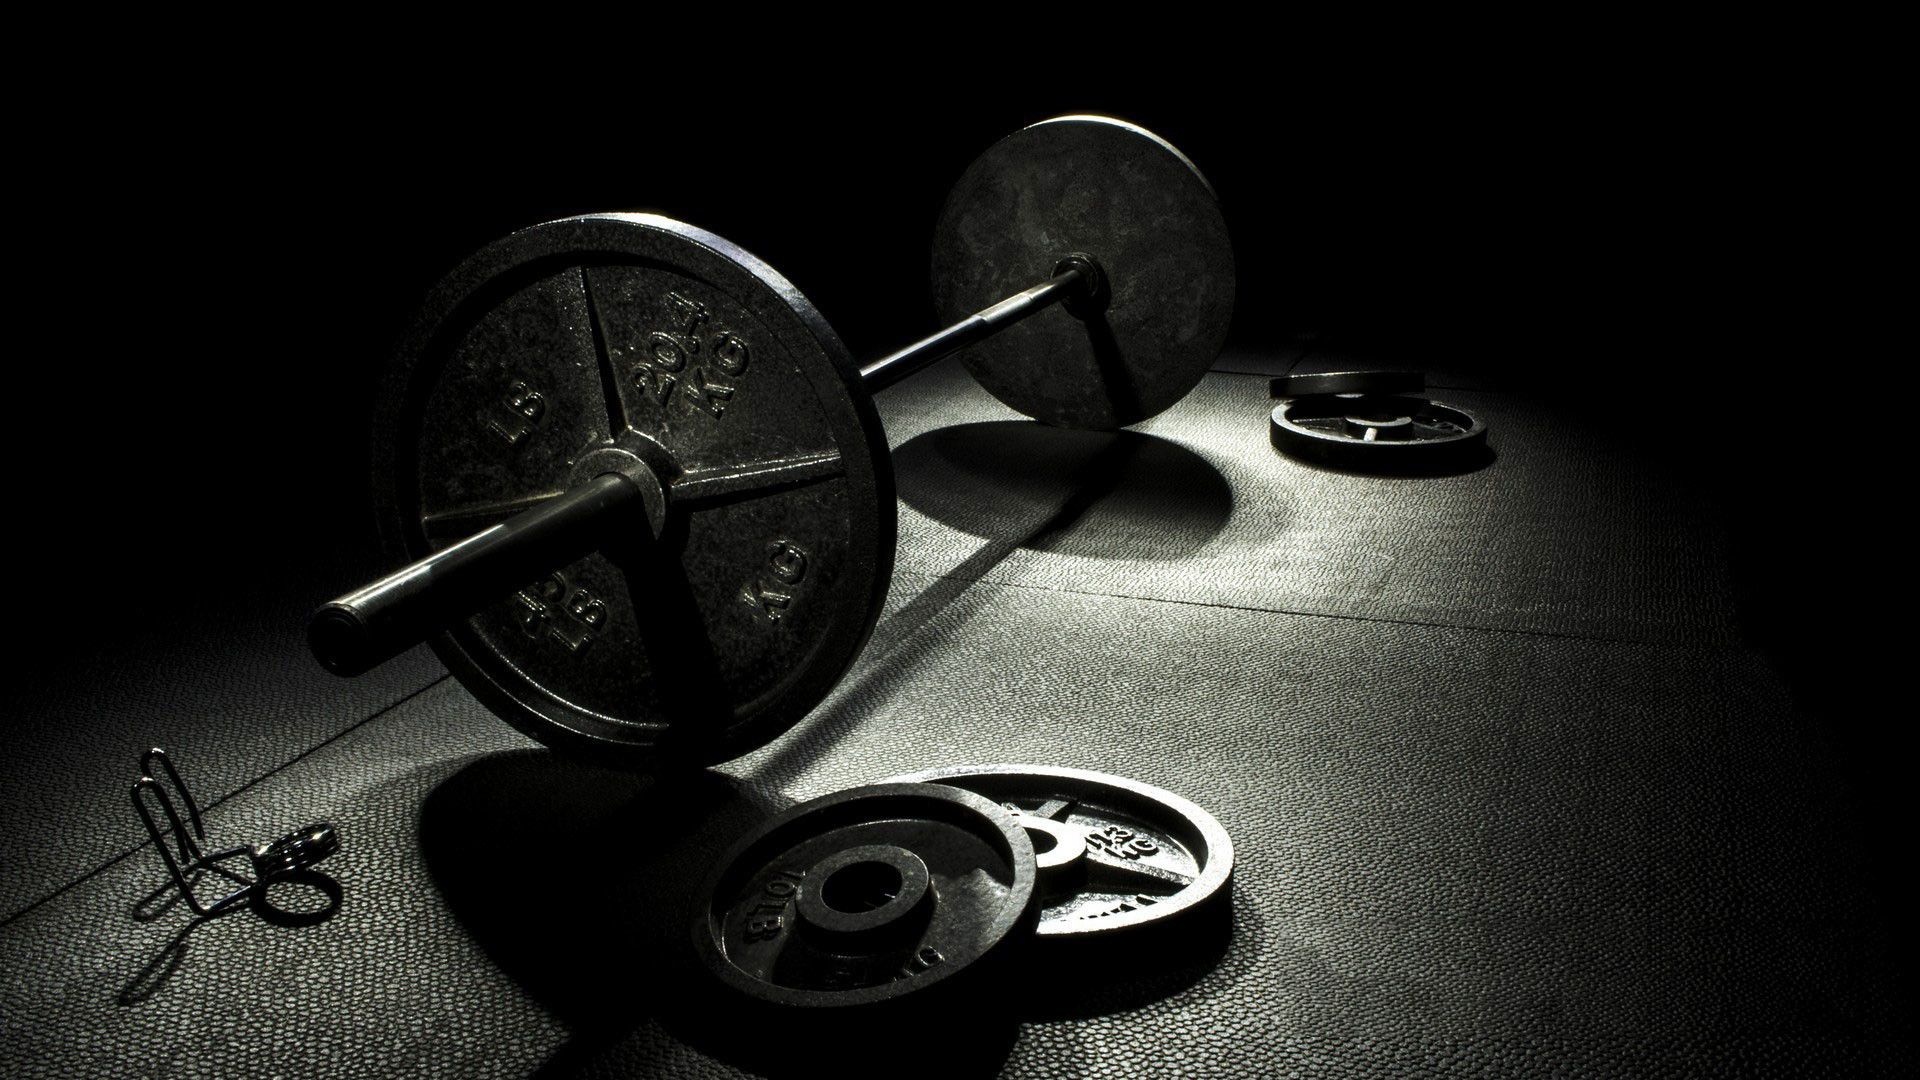 Weightlifting, Strong athletes, Powerful lifts, Gym workout, 1920x1080 Full HD Desktop